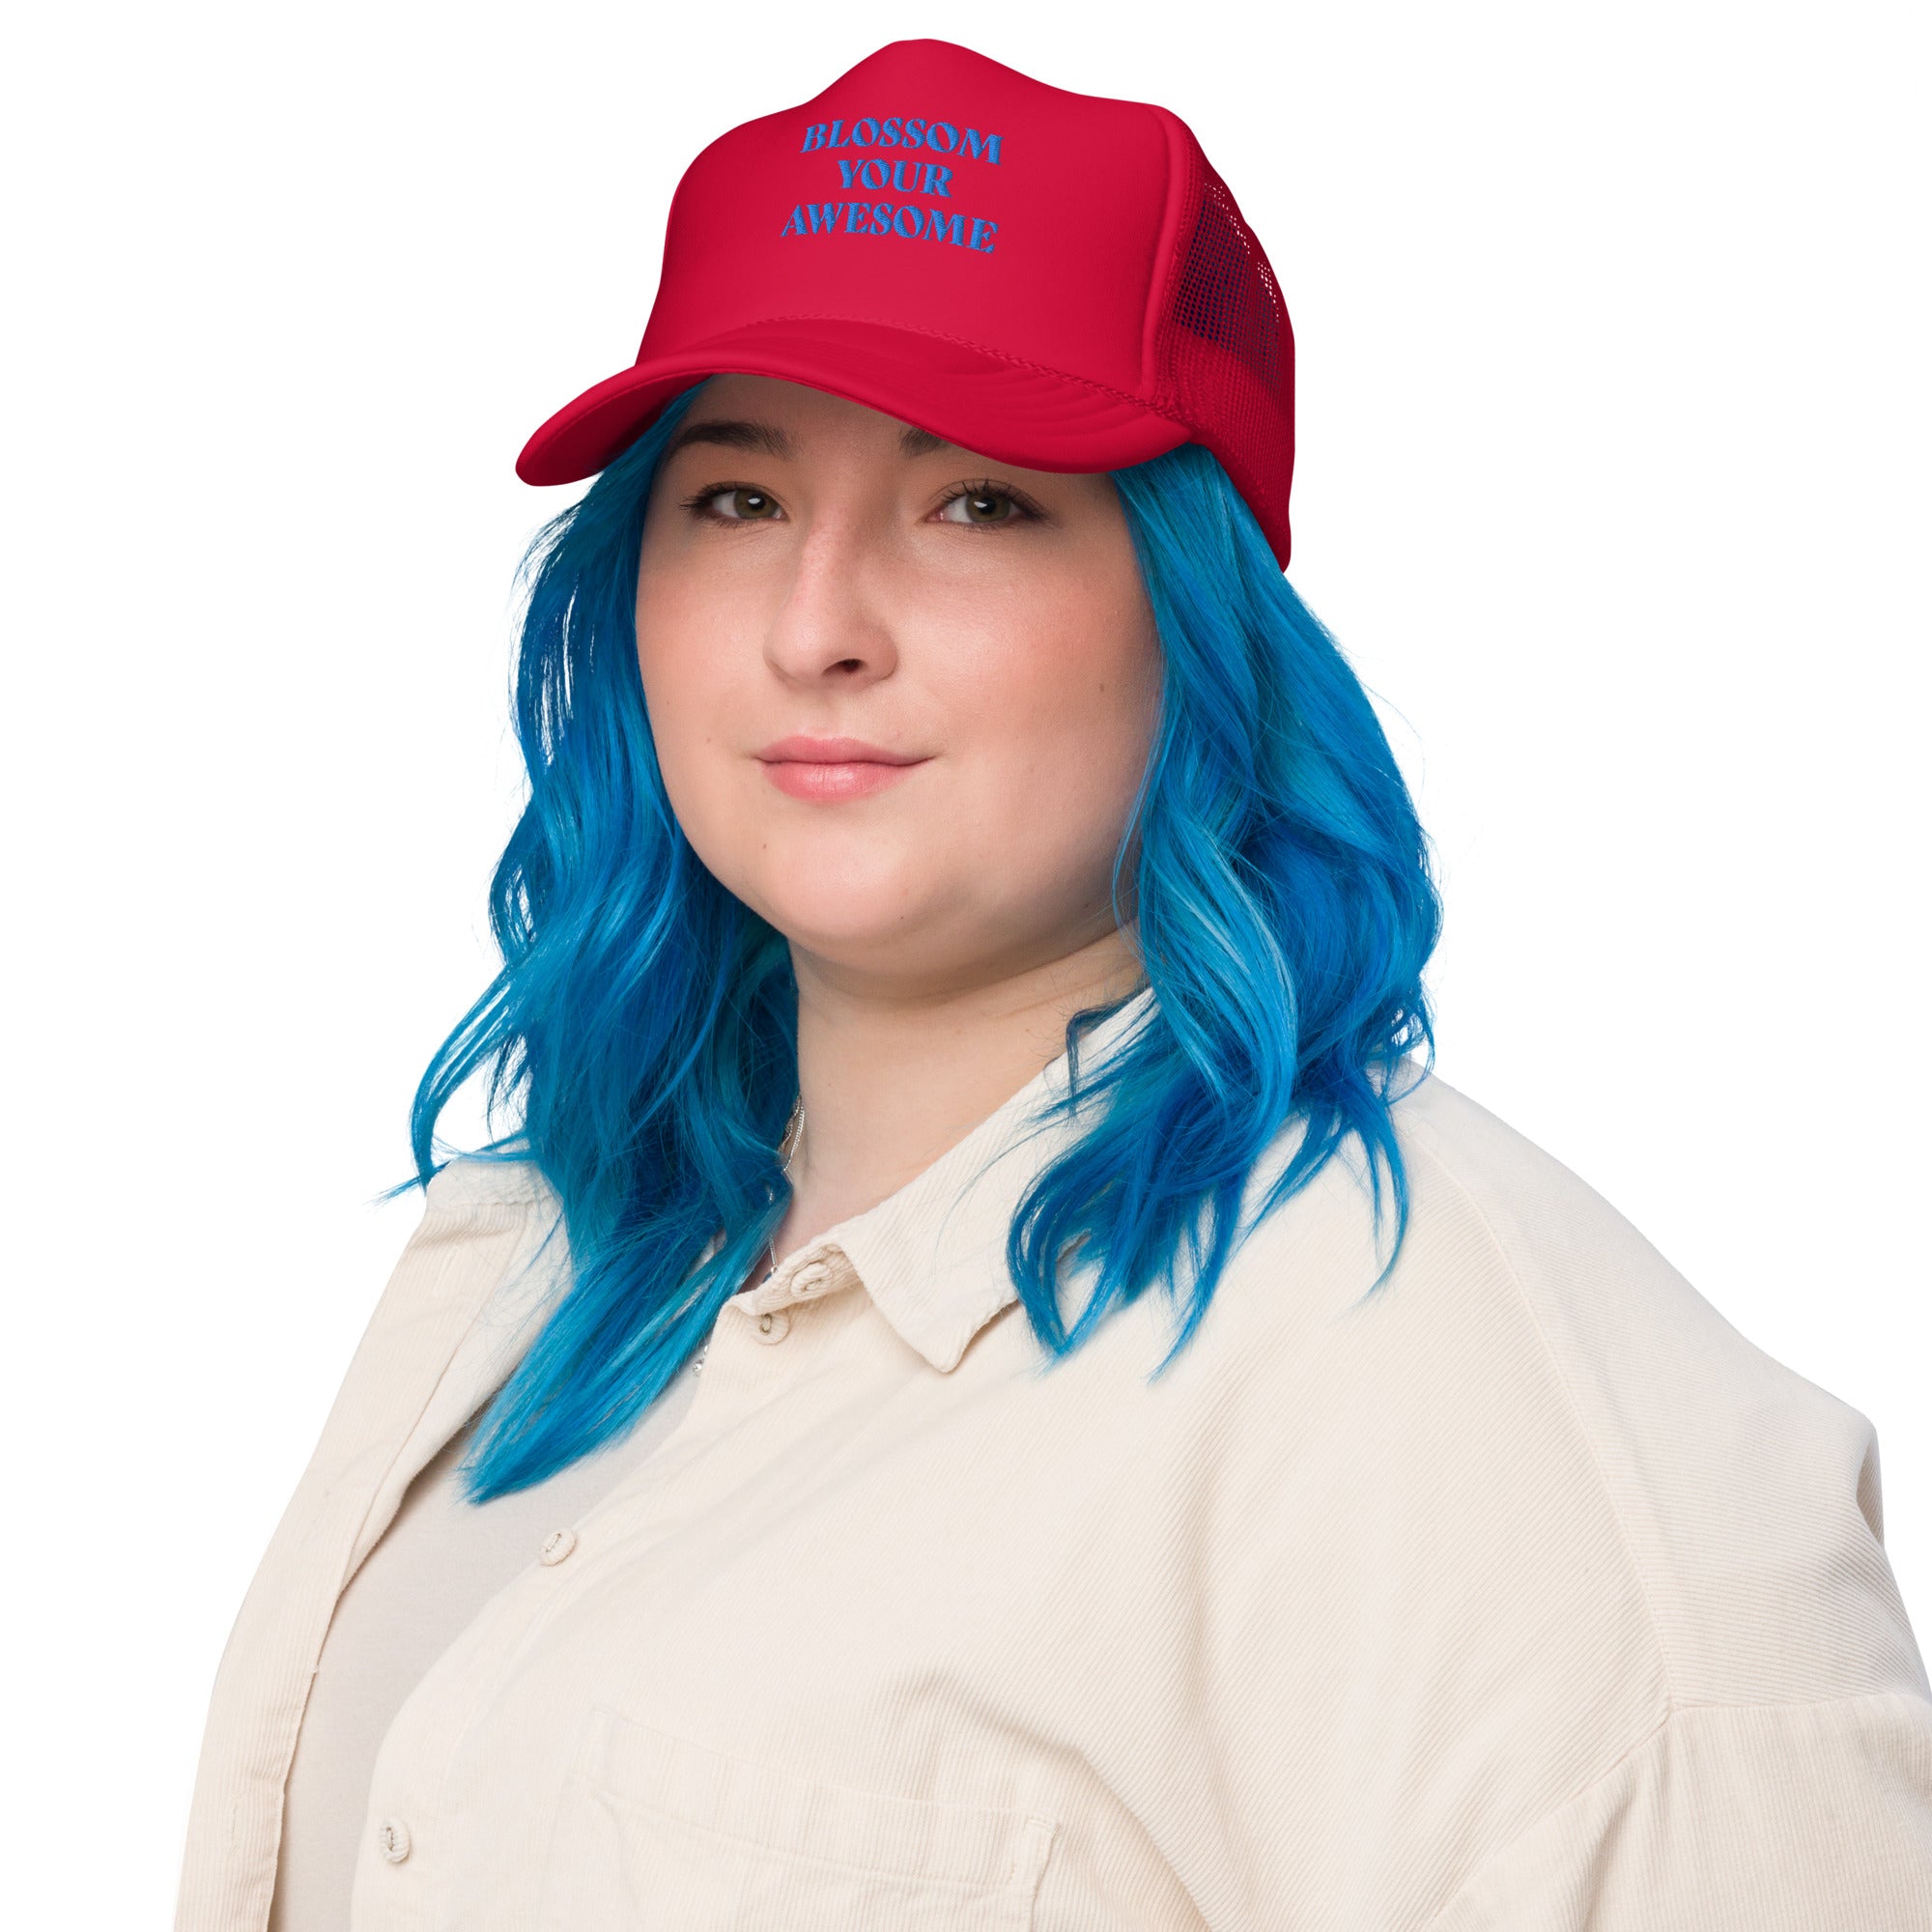 Blossom Your Awesome Trucker Hat